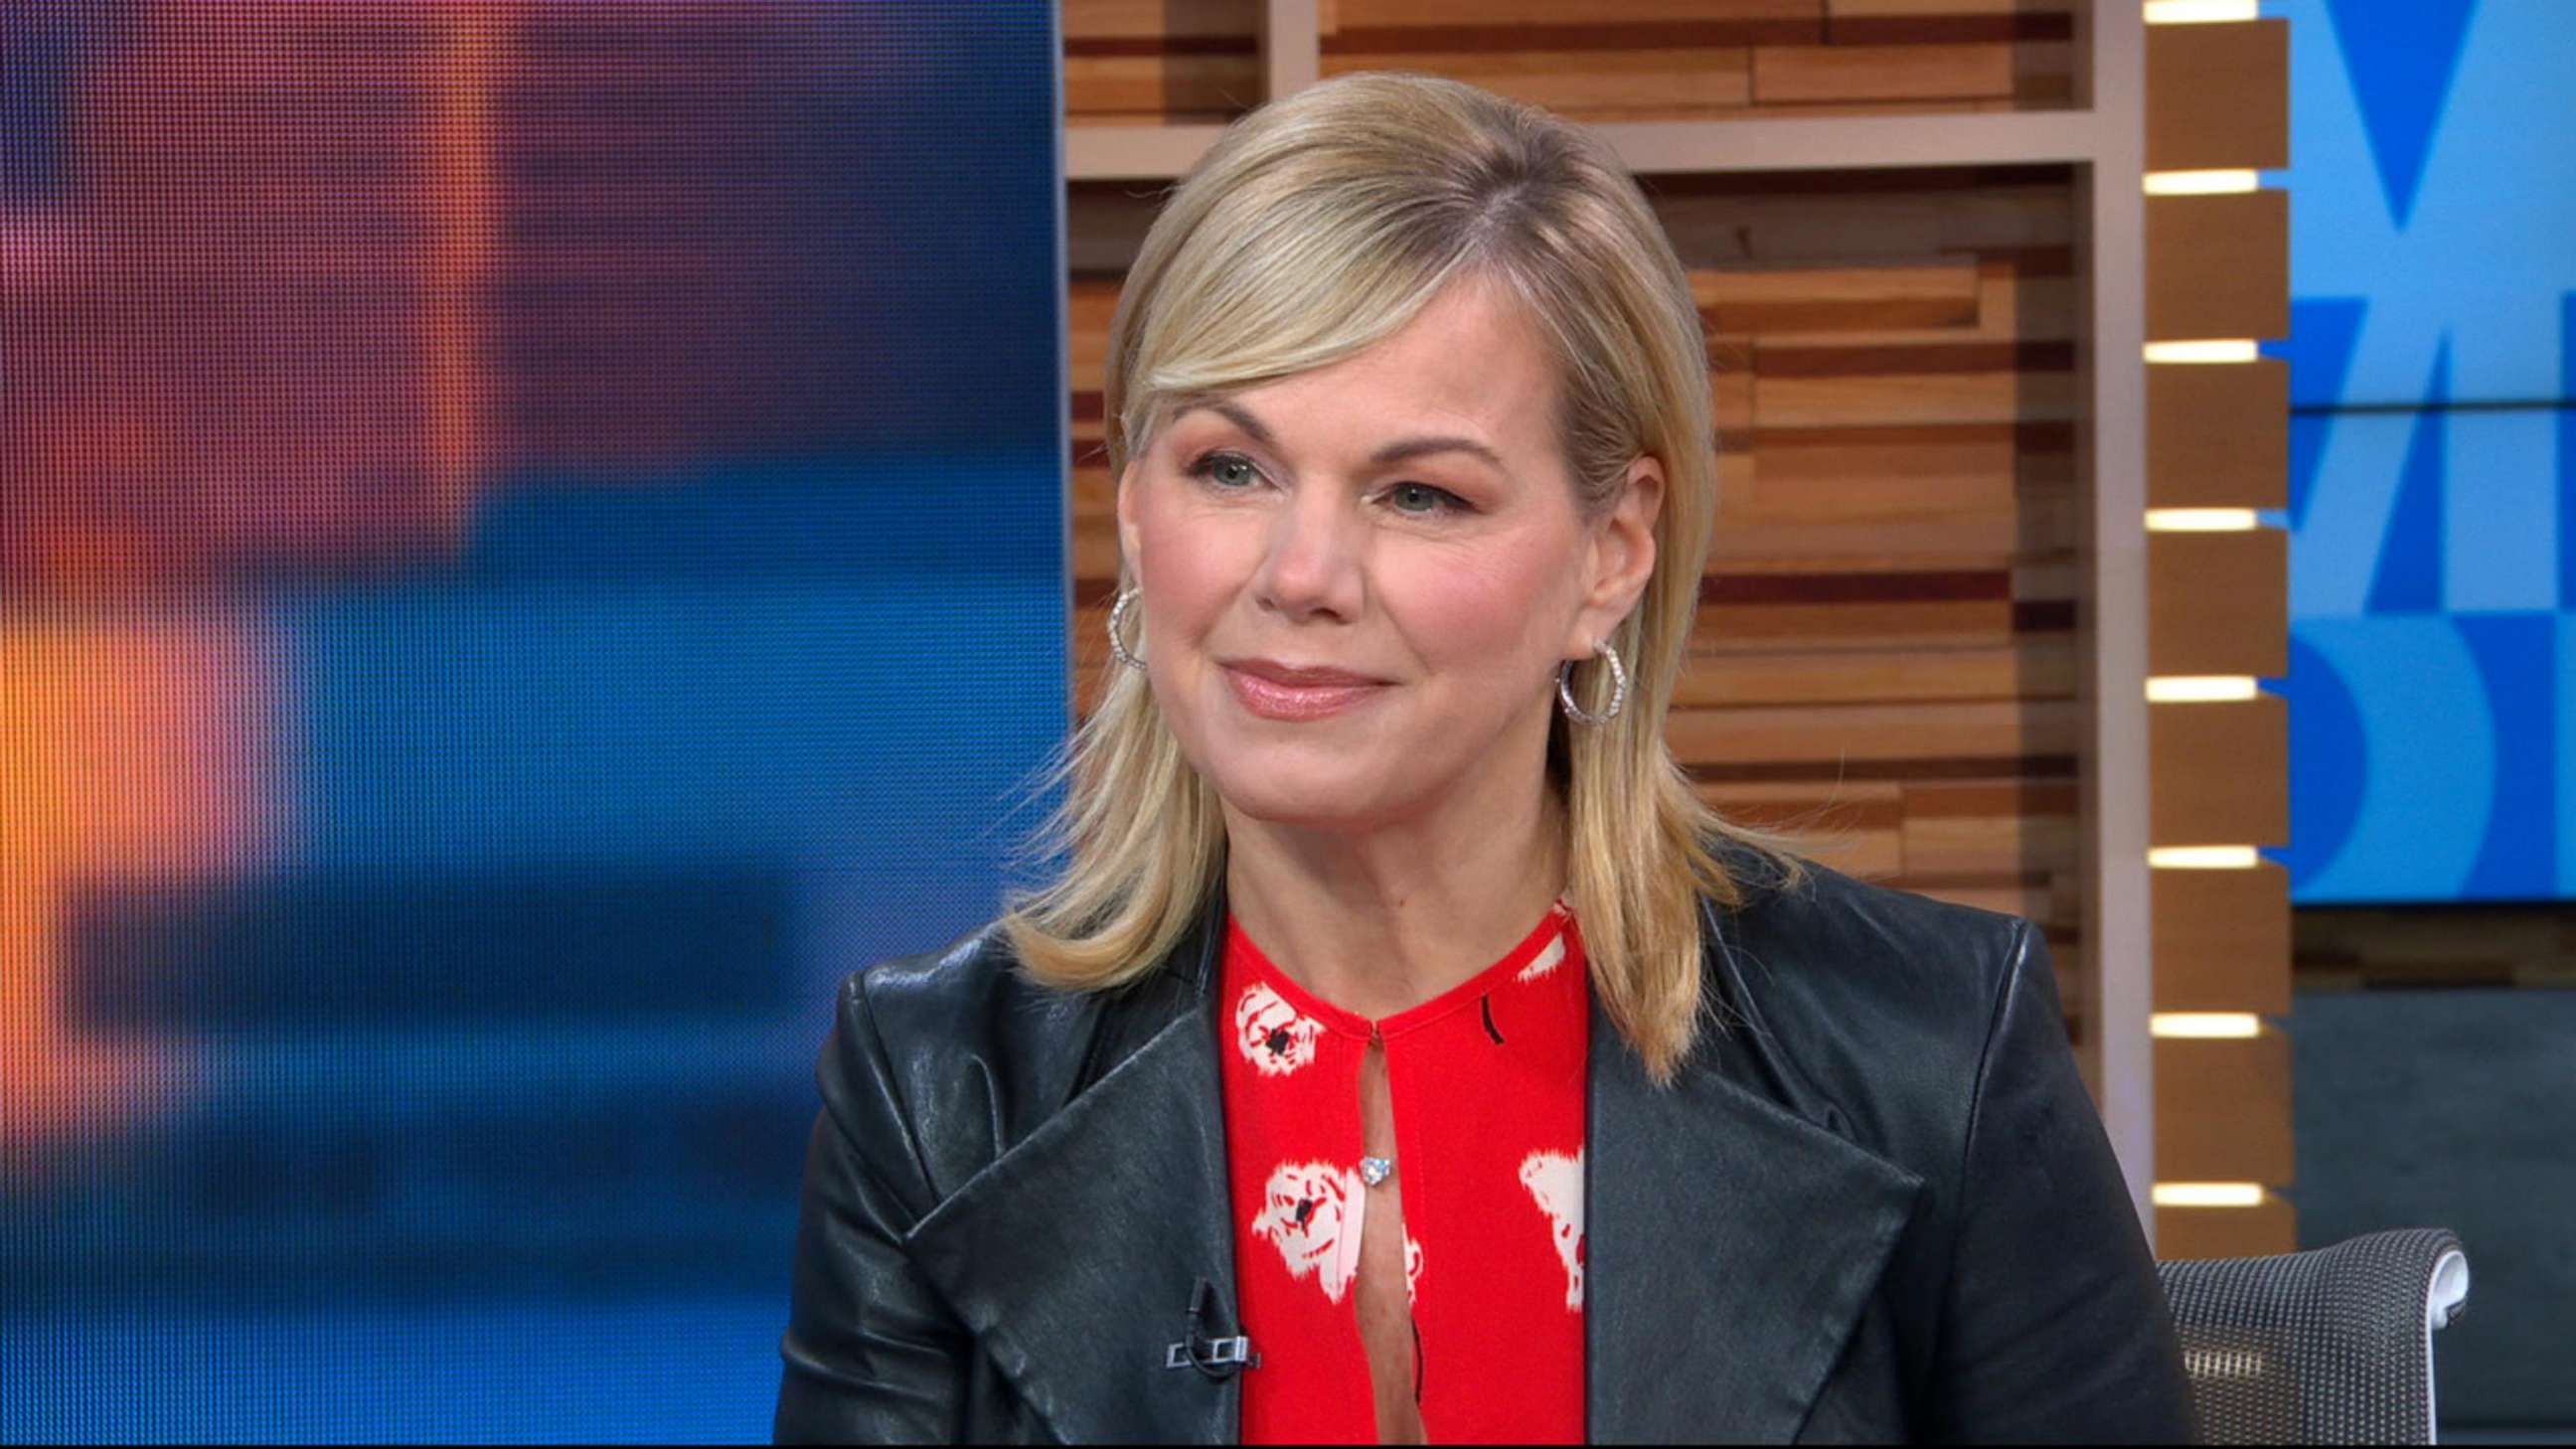 PHOTO: Gretchen Carlson appears on "Good Morning America," June 5, 2018.